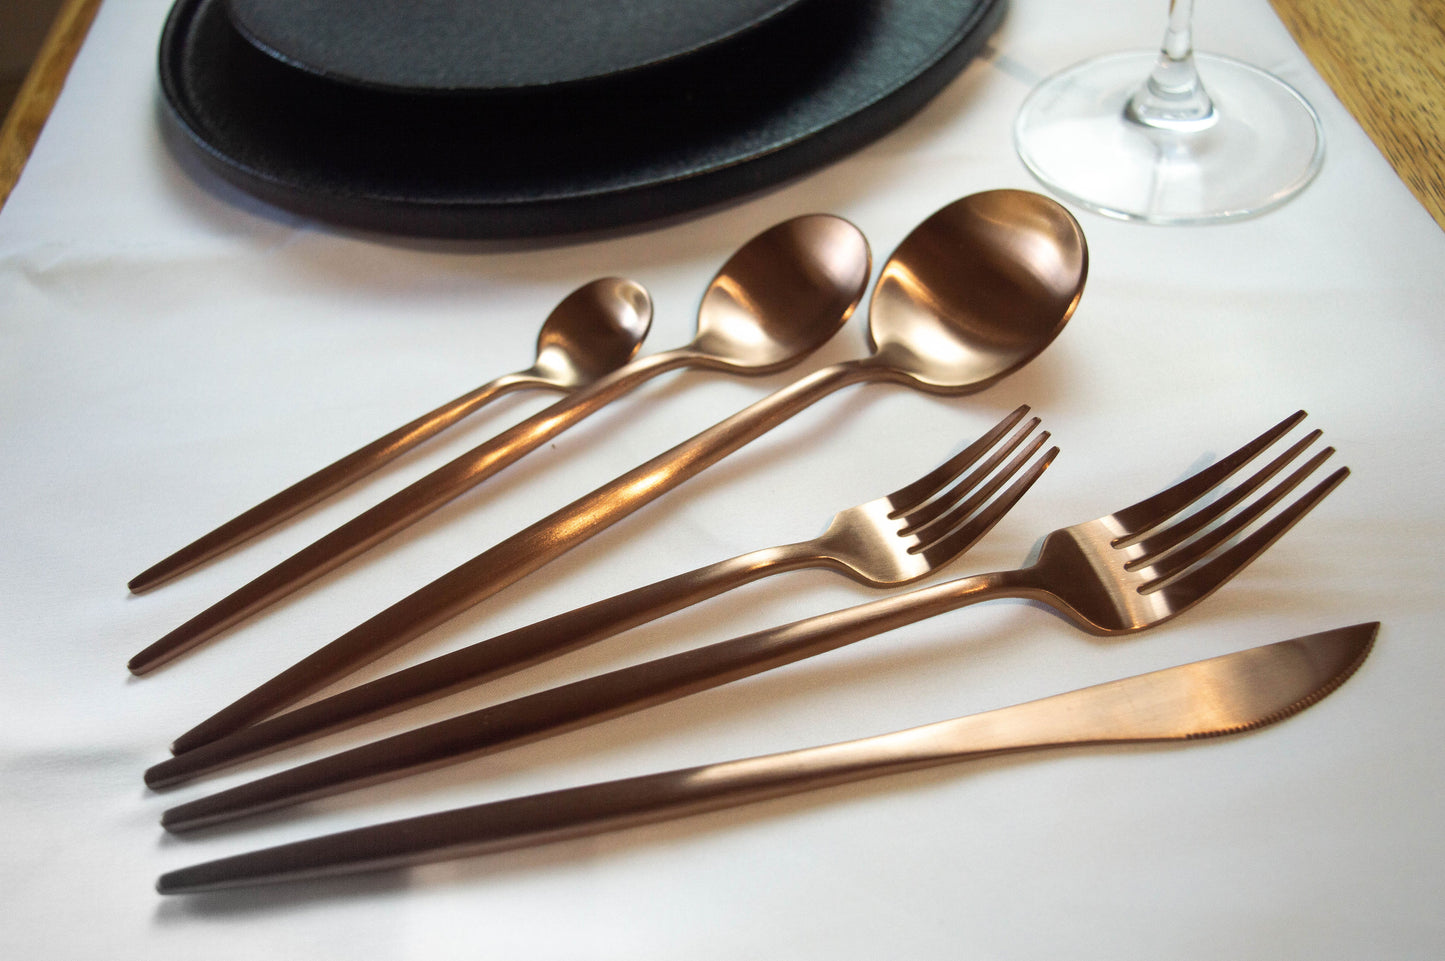  serving utensils set for parties unique best copper silverwear presents memorial day Christmas lunar new year easter independence day gifts for women cutlery silverware black brown gold chospticks chapstick dining table decor and accessories cylinder box gift Korean utensils set